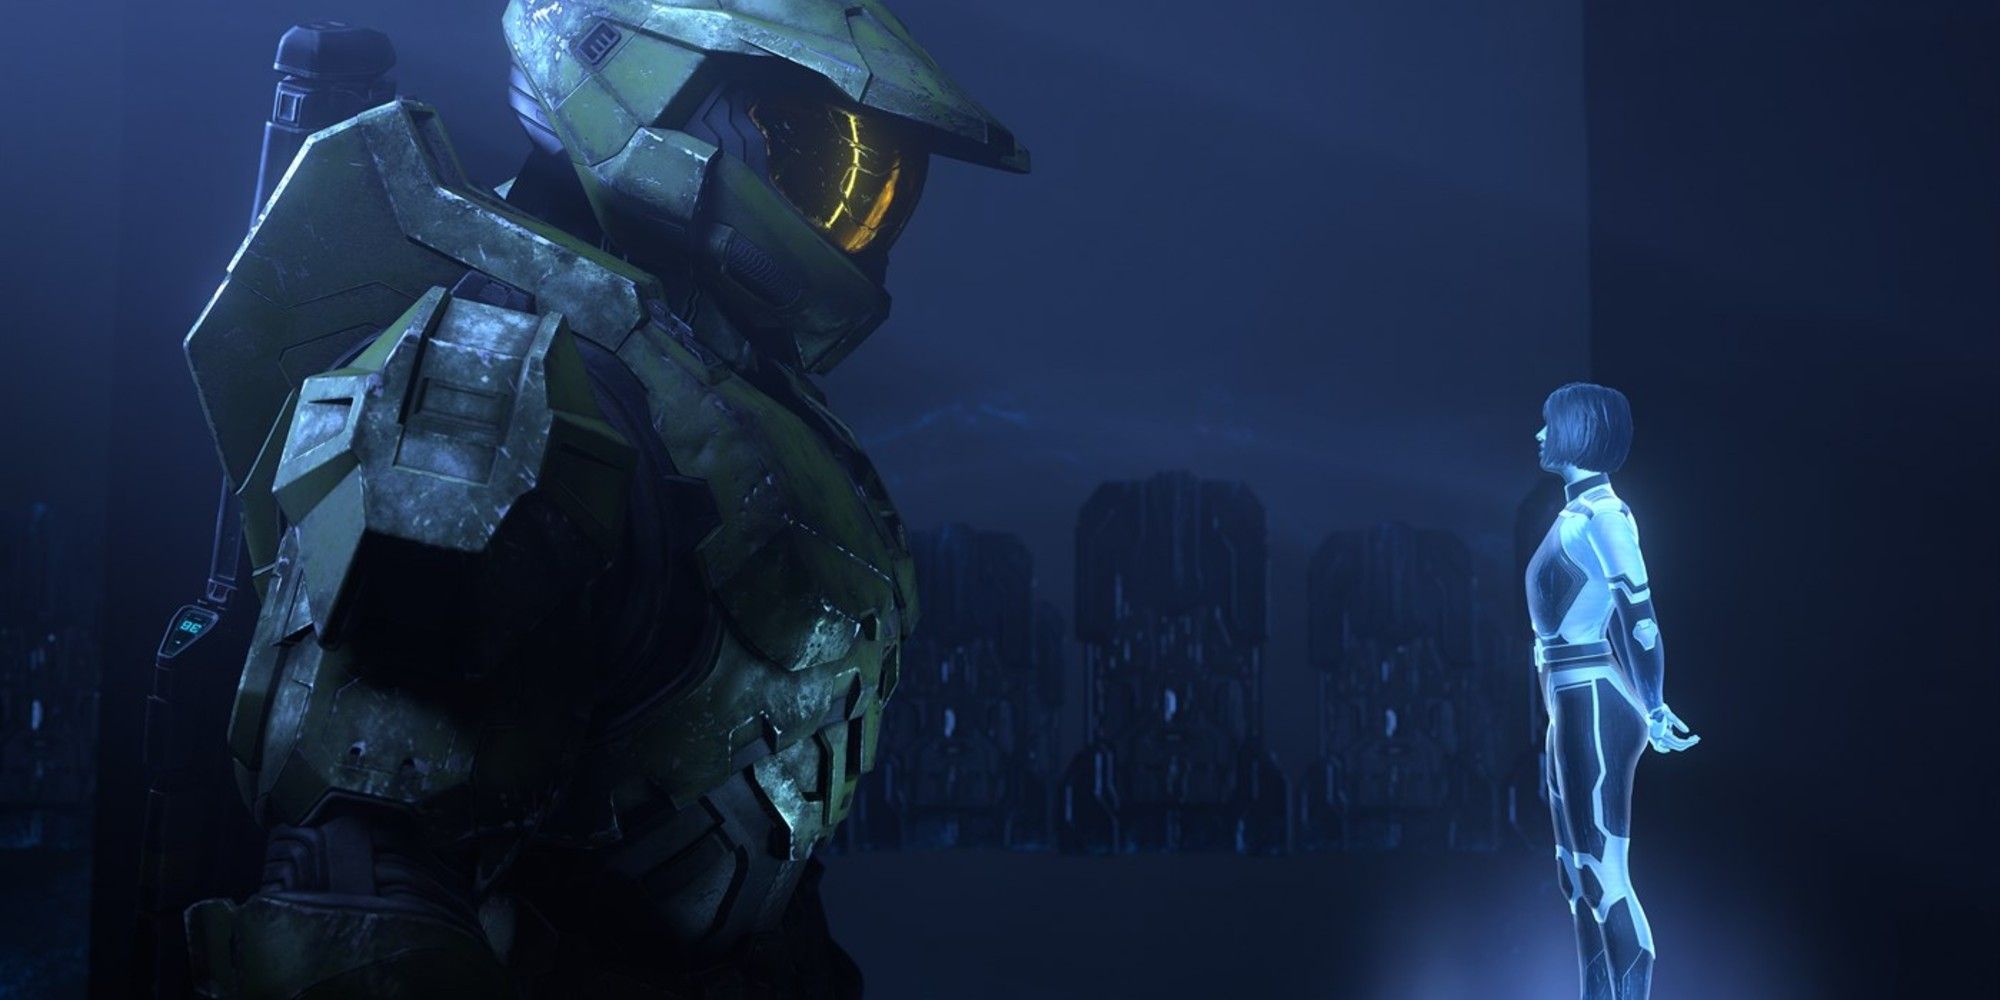 A screenshot showing Master Chief and Cortana in Halo Infinite